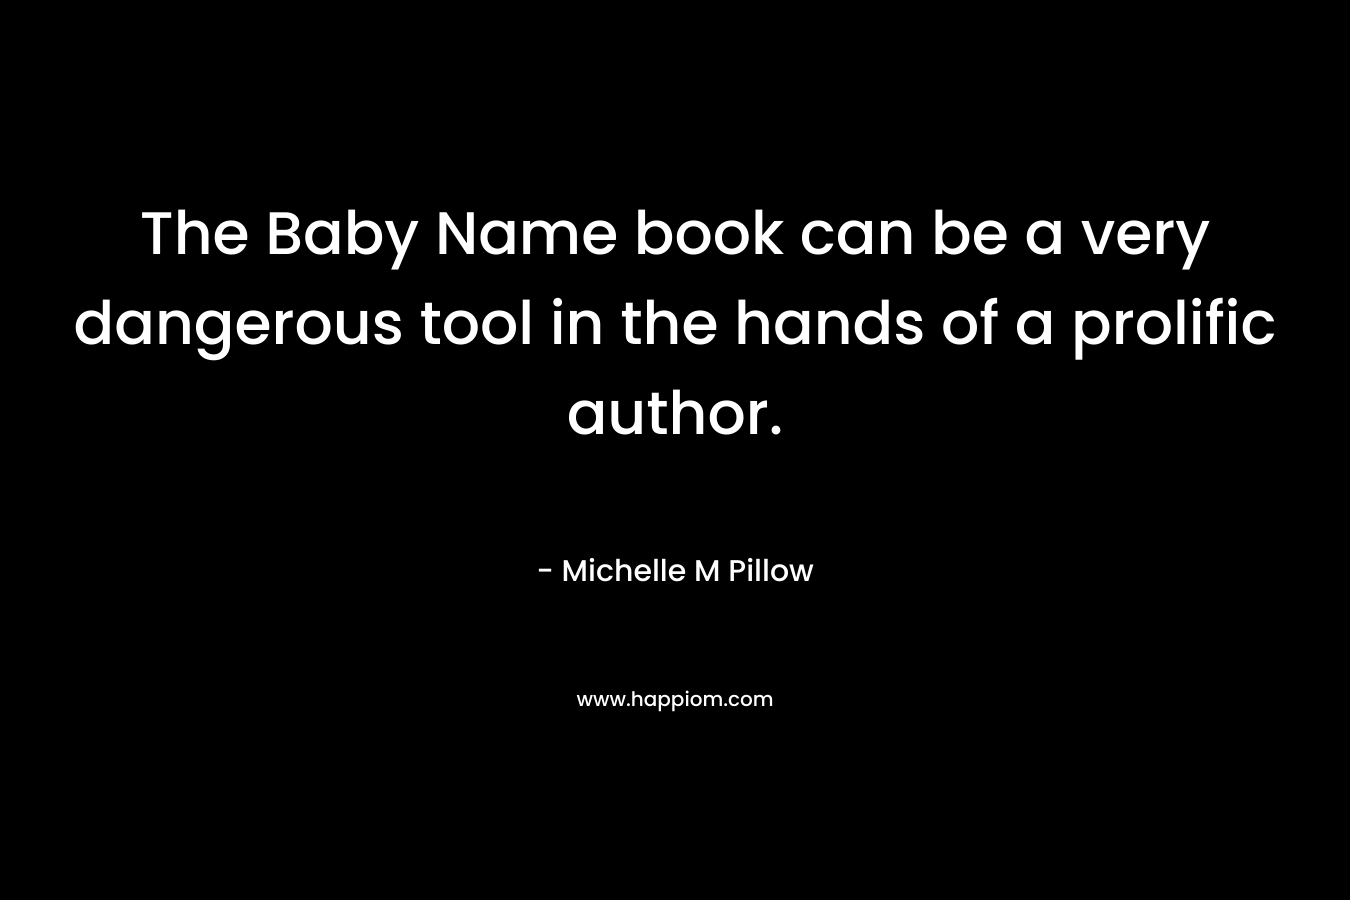 The Baby Name book can be a very dangerous tool in the hands of a prolific author.